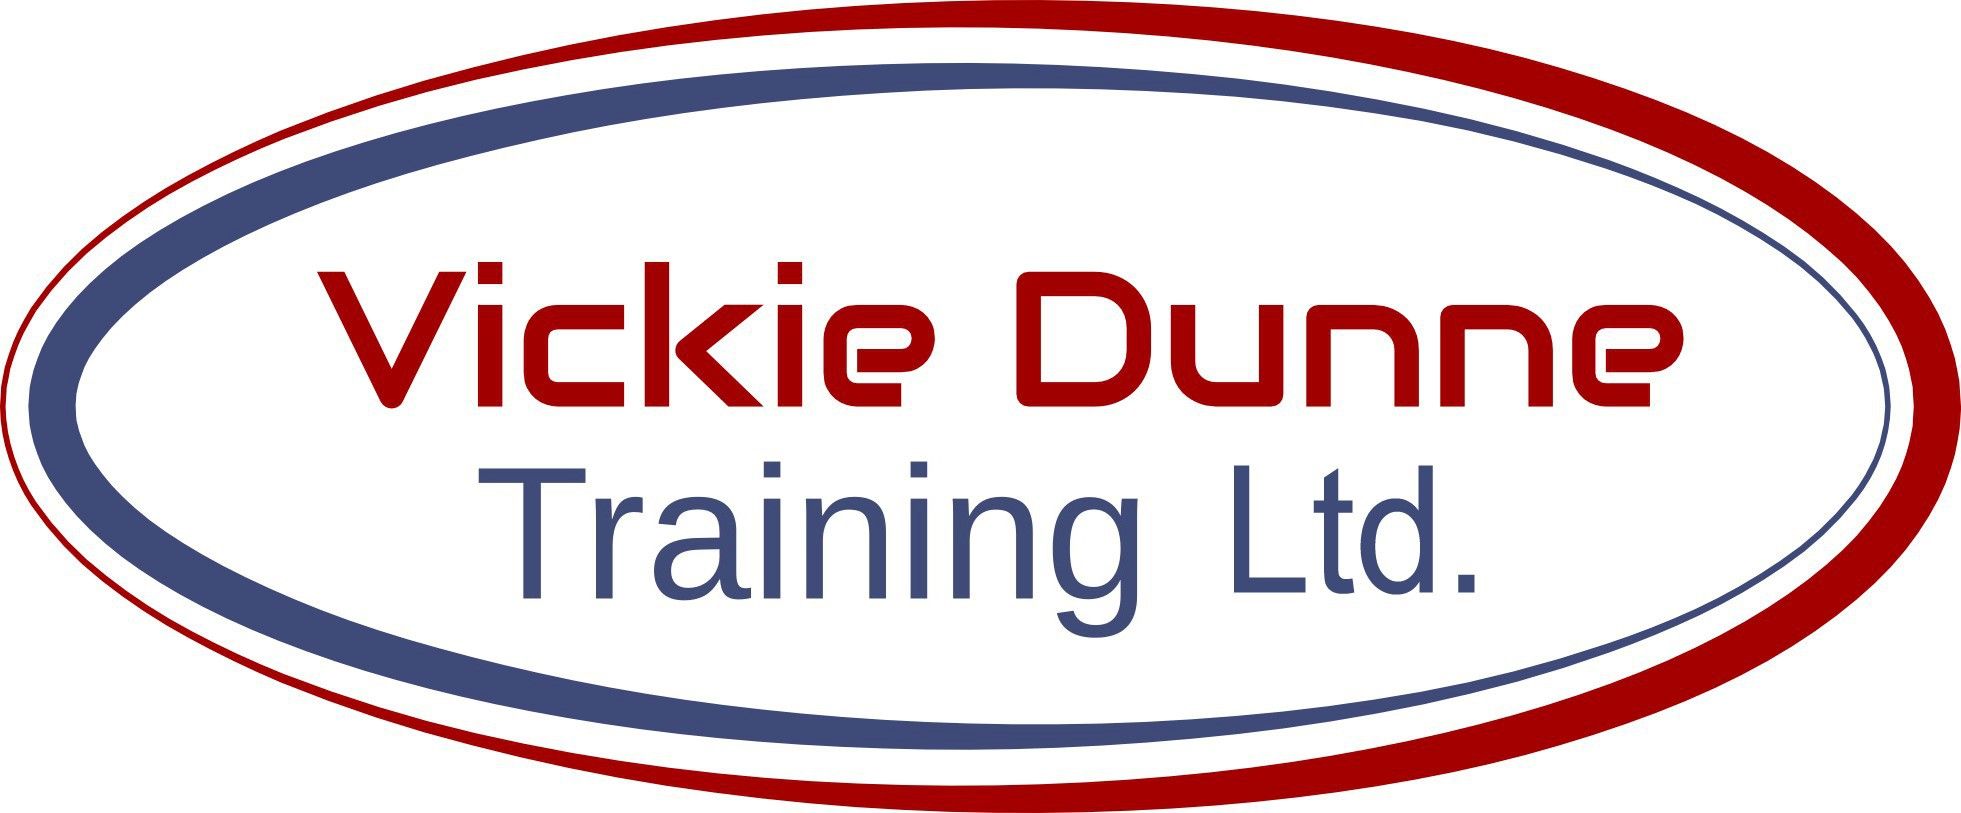 Vickie Dunne Training